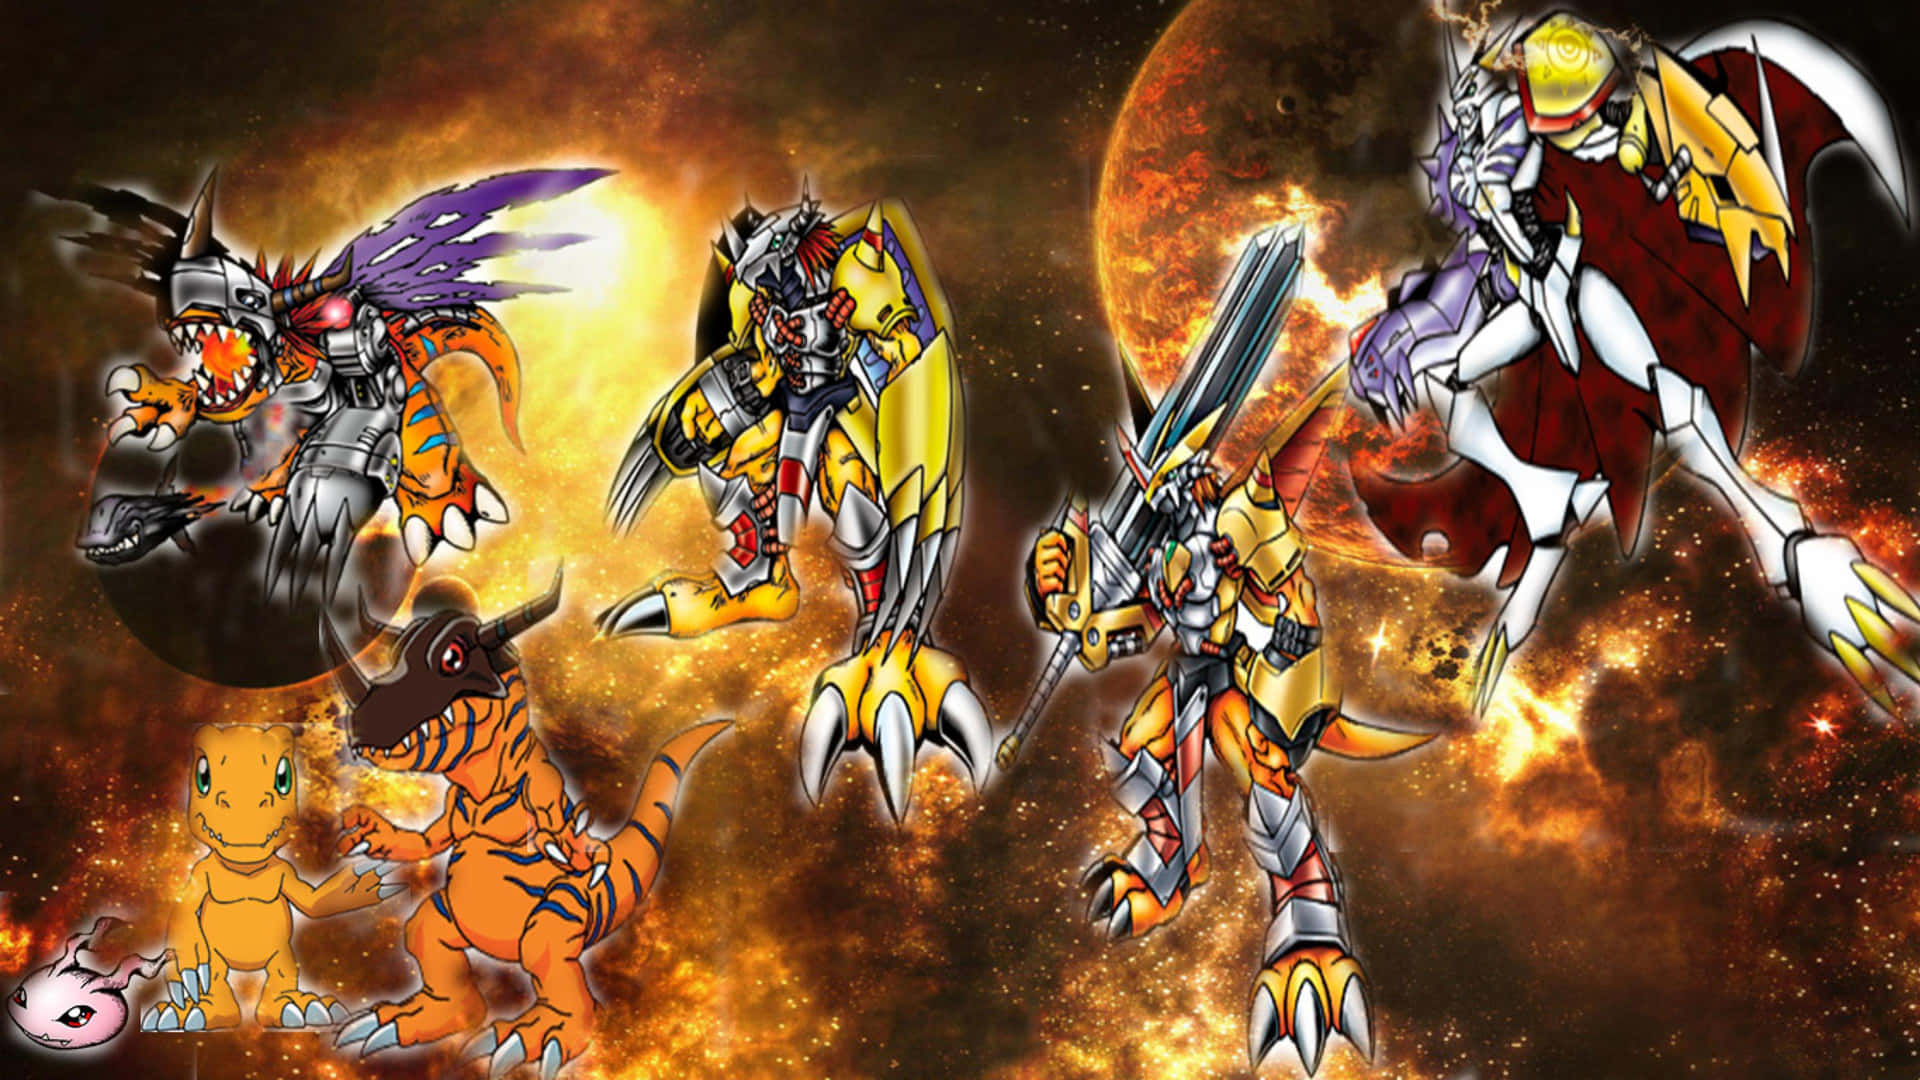 Join the Battle with Digimon